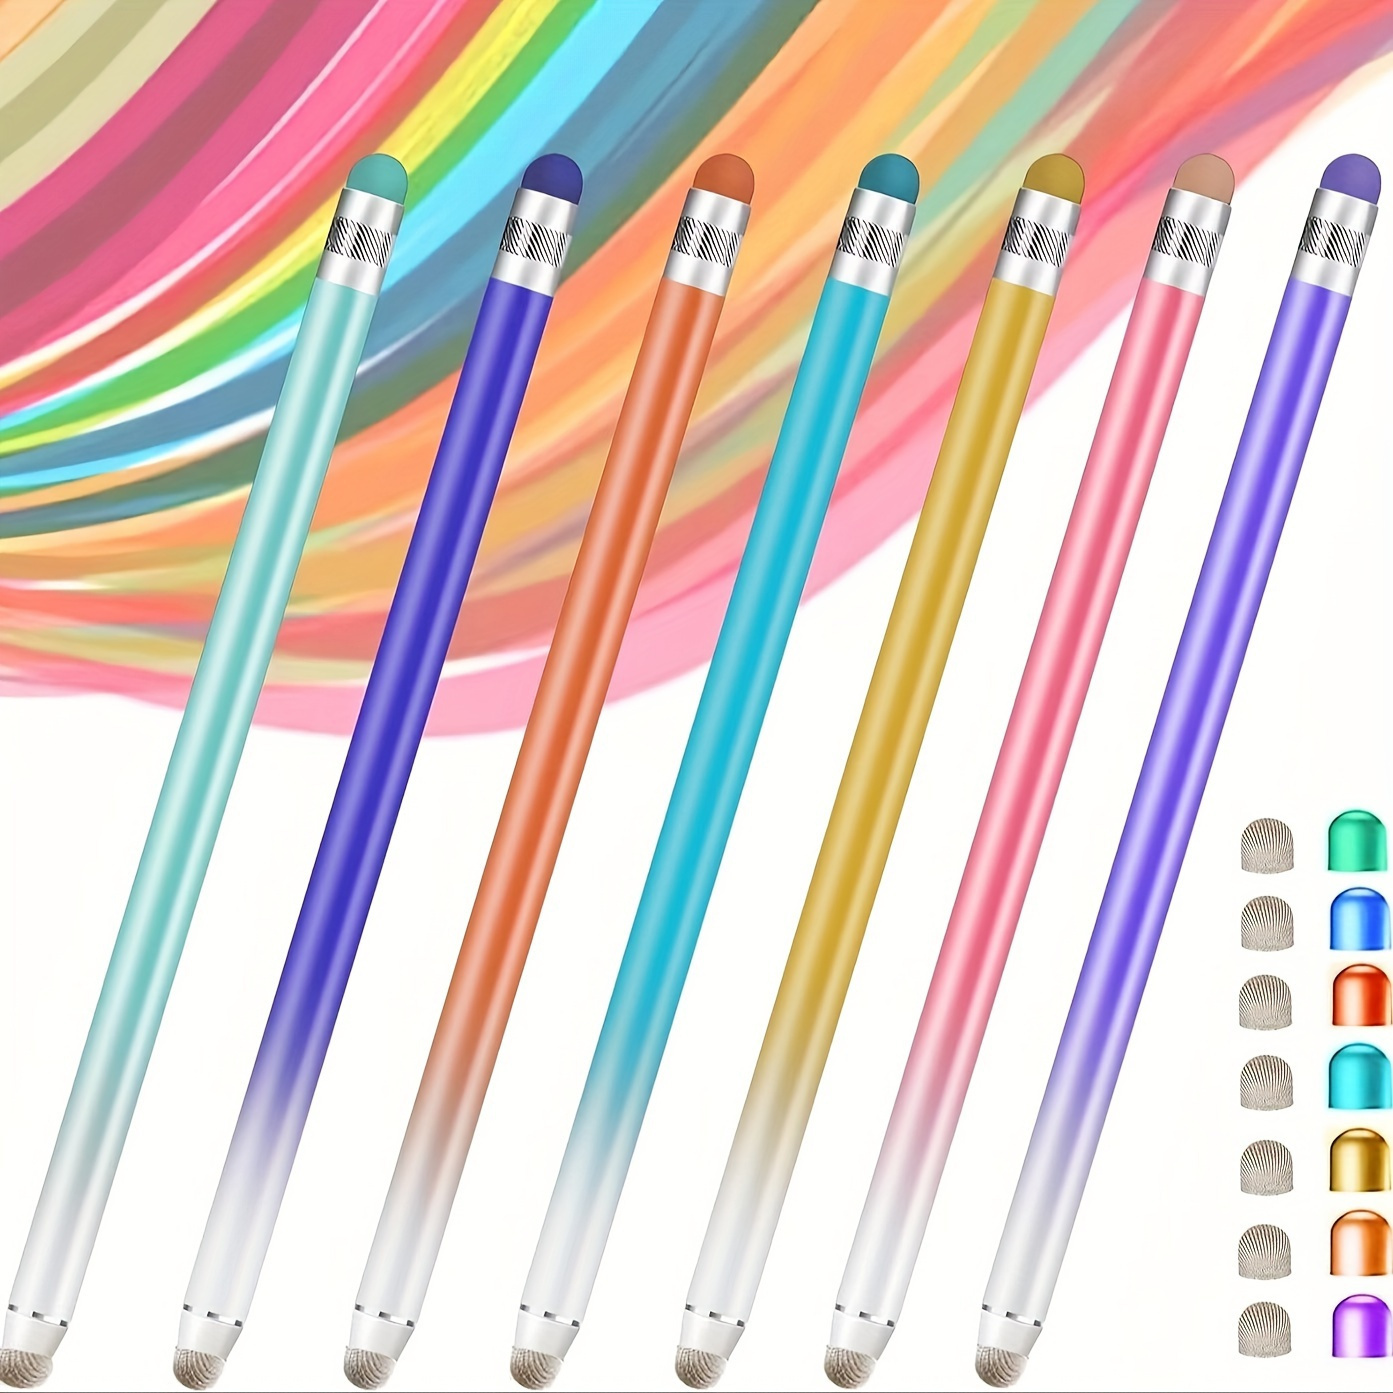 

6.22-inch Universal Stylus Pens For Touch Screens, High Sensitivity And Precision, 2-in-1 Fiber & Rubber Tips, Compatible With Ipad/tablet/phone/laptops, 8 Extra Tips Included, Assorted Colors